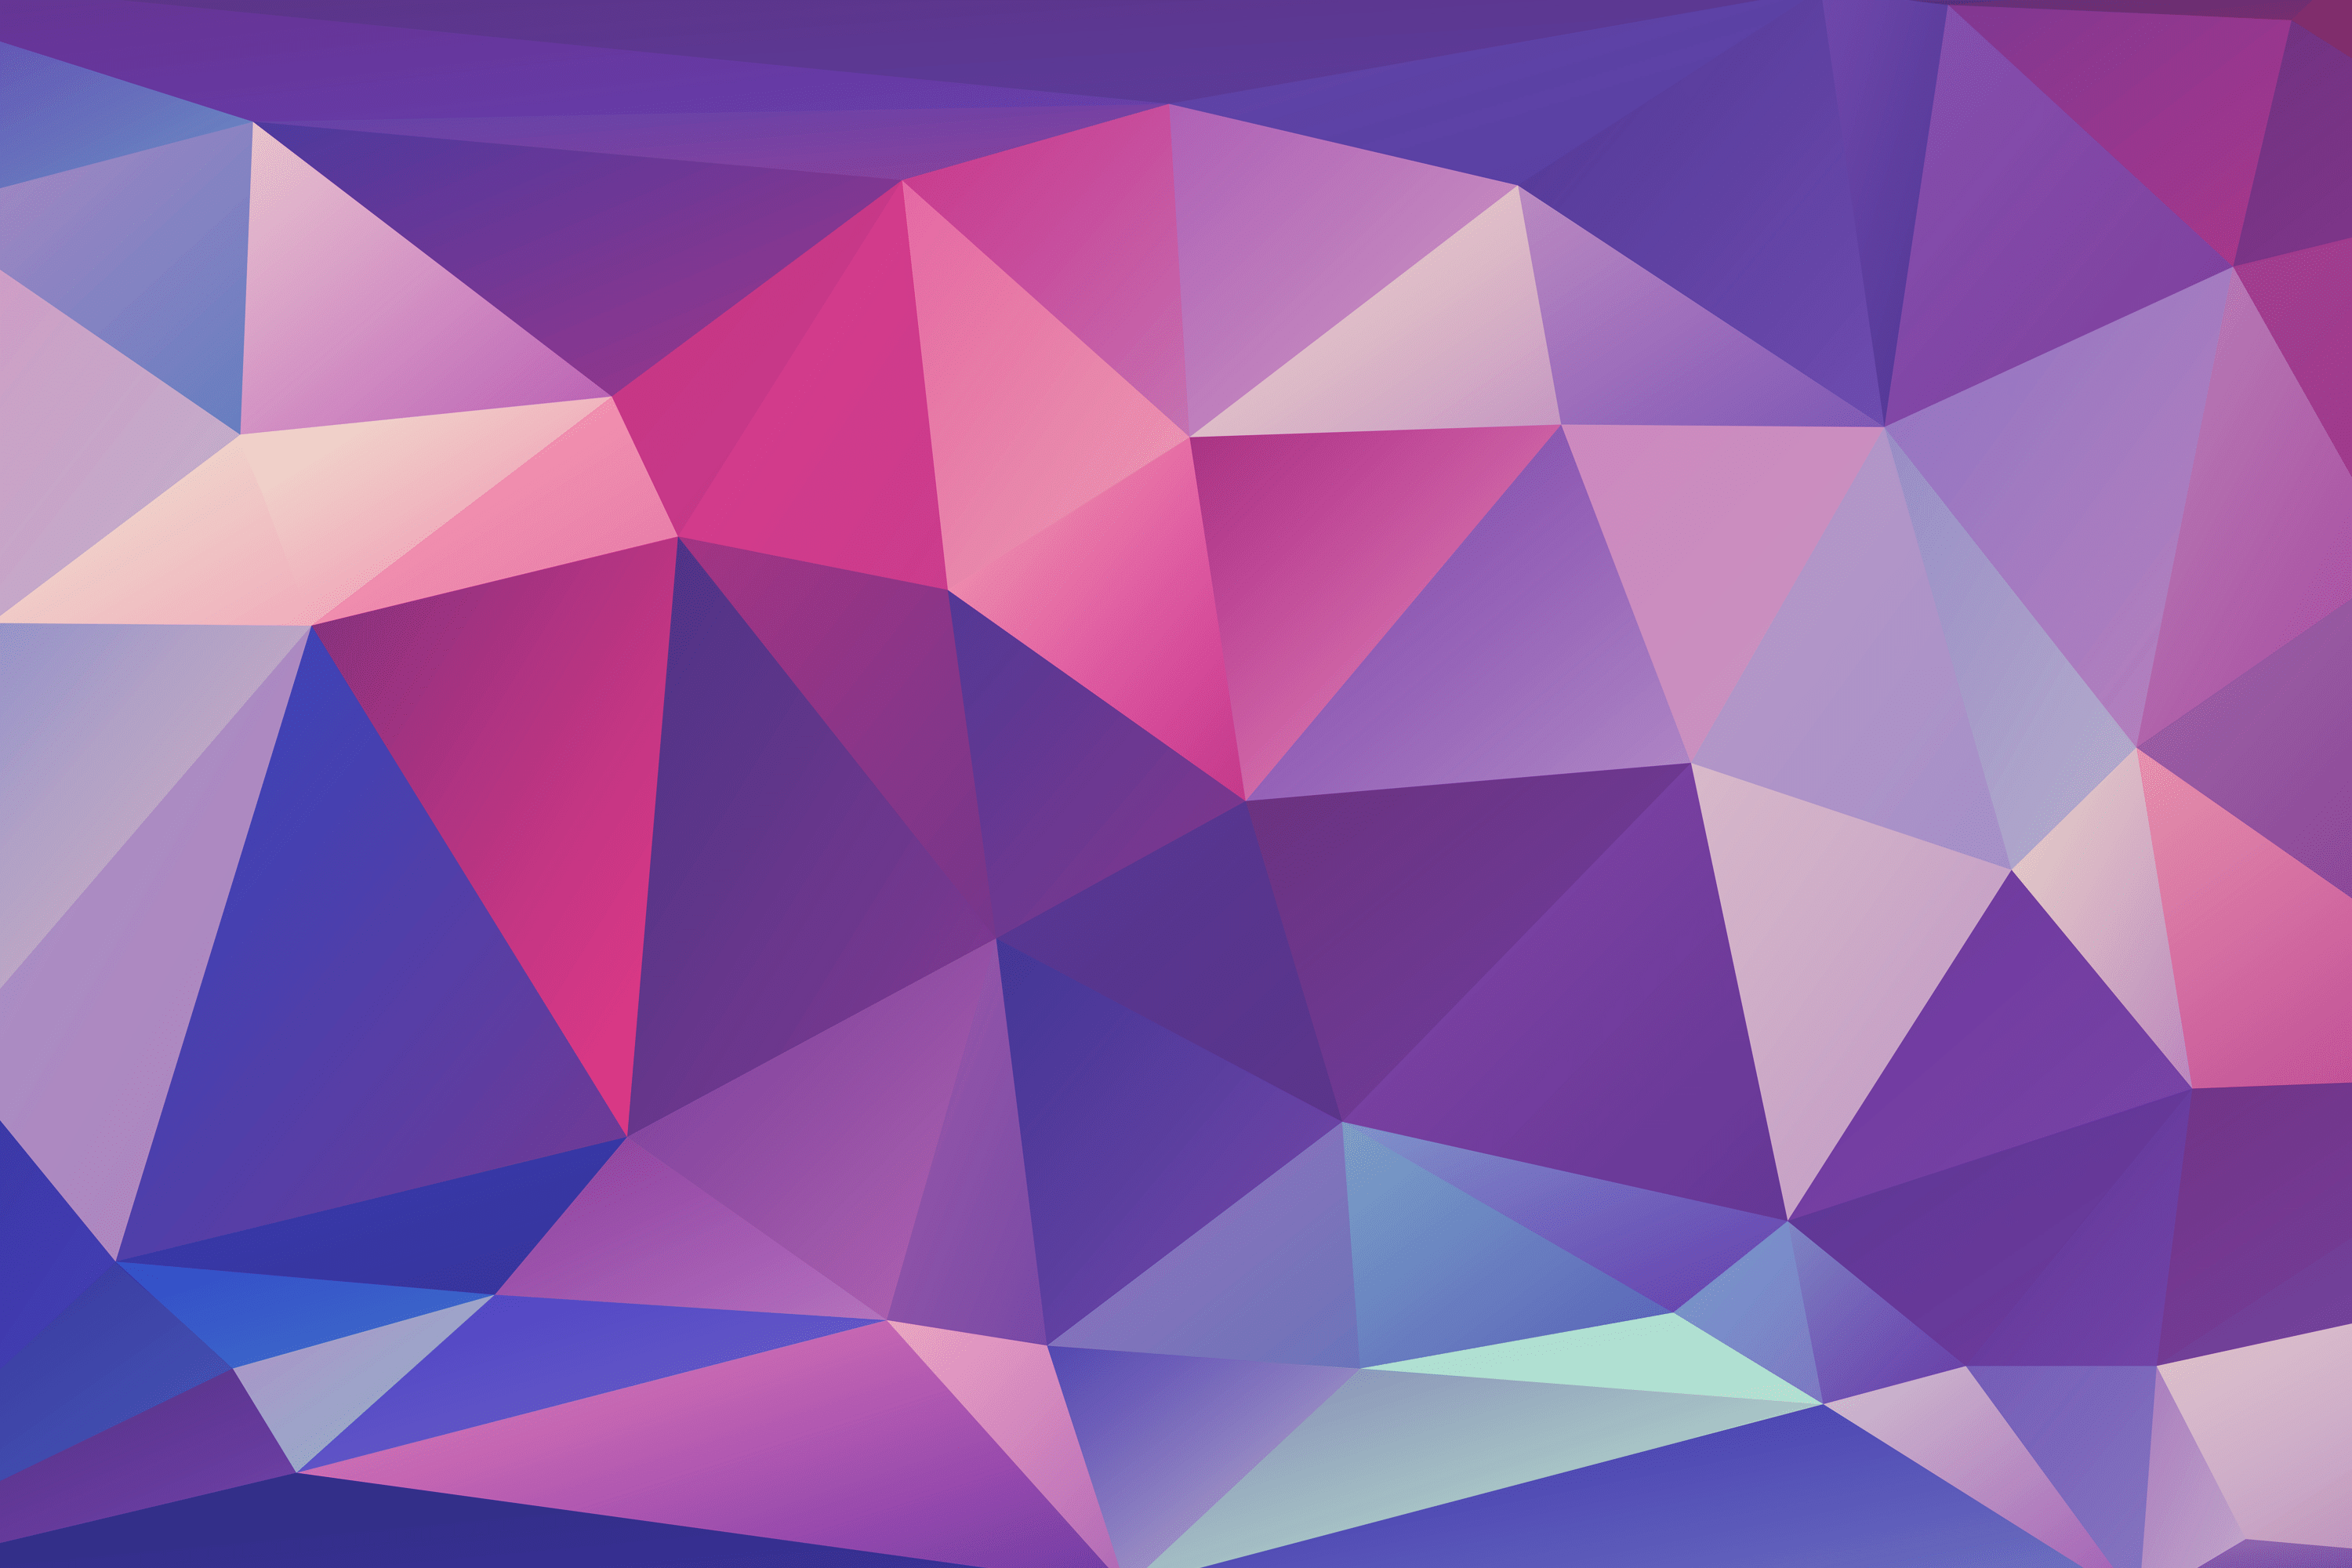 A purple and blue abstract background - Low poly